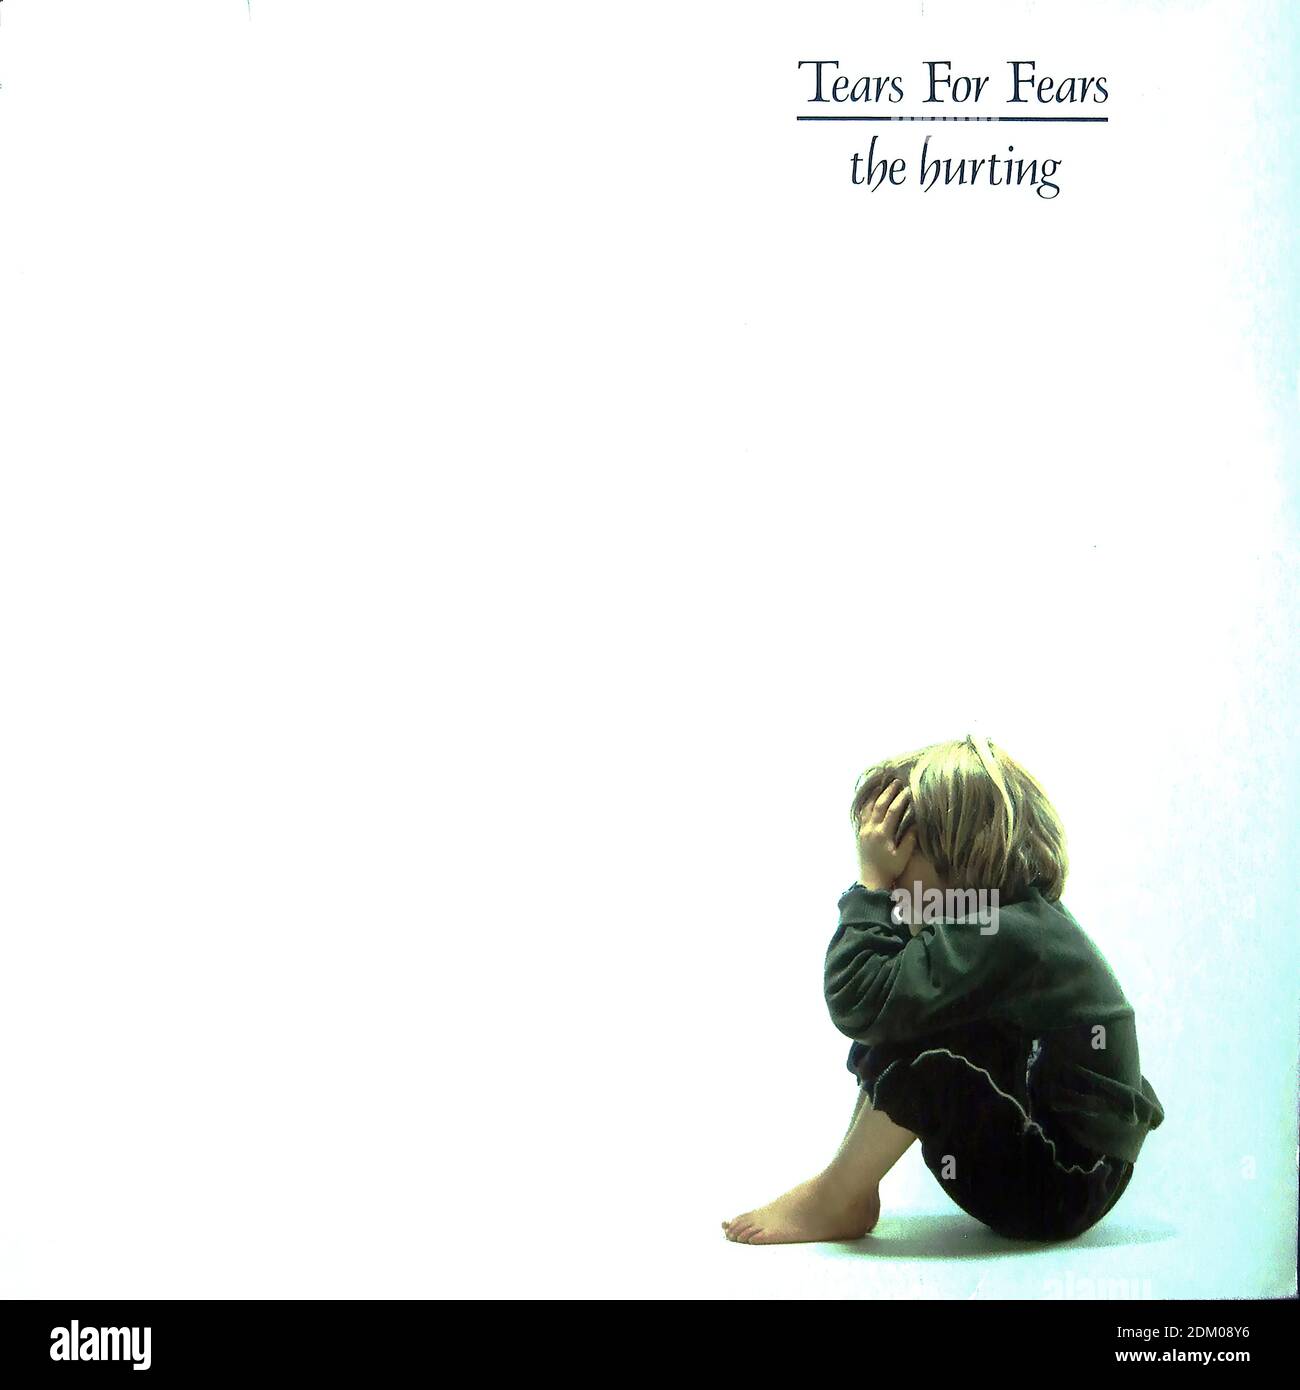 Tears For Fears - The Hurting - Vintage vinyl album cover Stock Photo